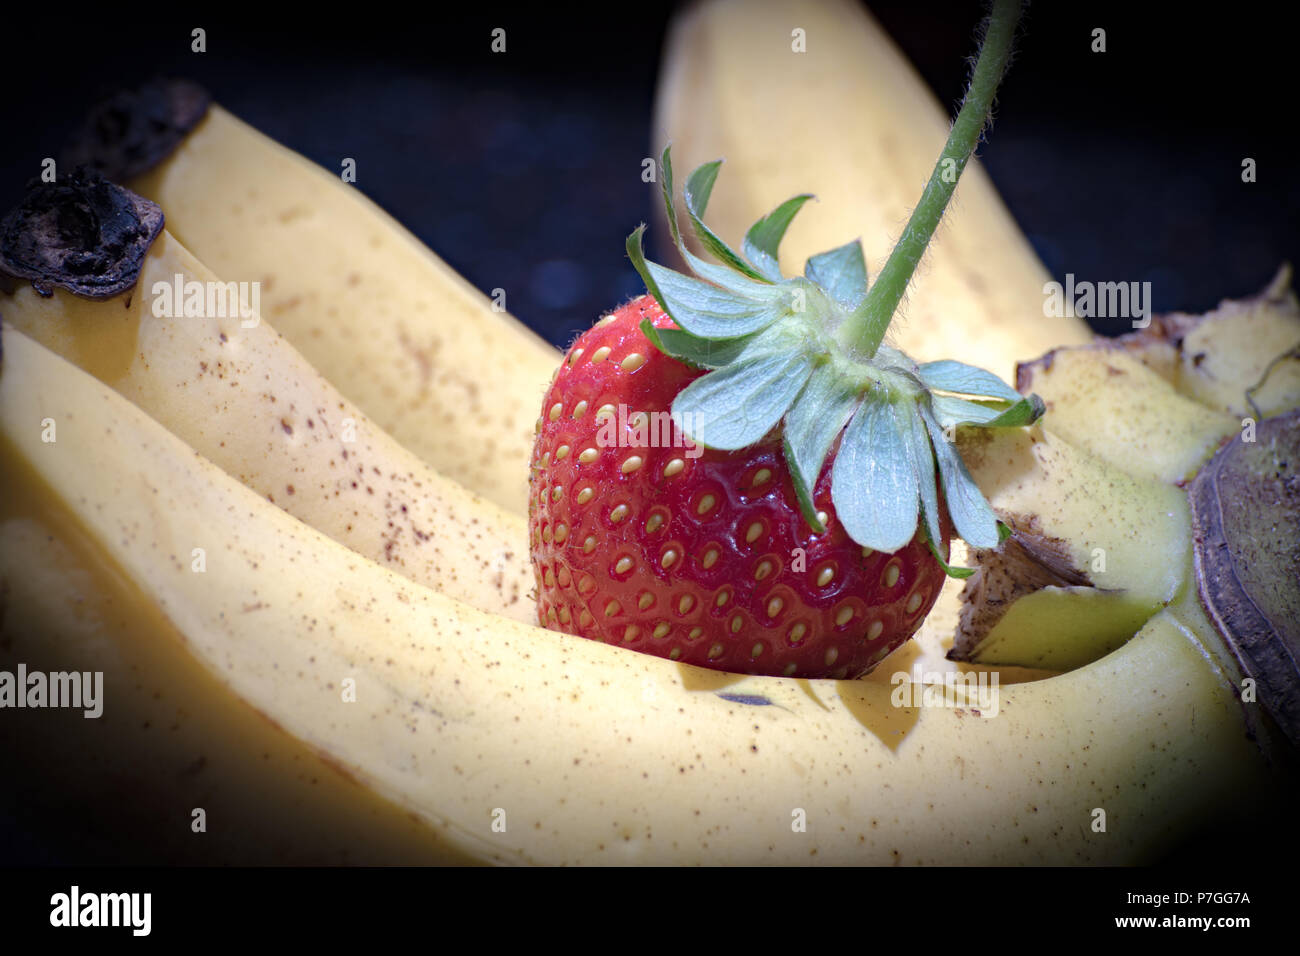 Bananas and a juicy strawberry, freshly picked from the garden, grown in Jamaica Stock Photo